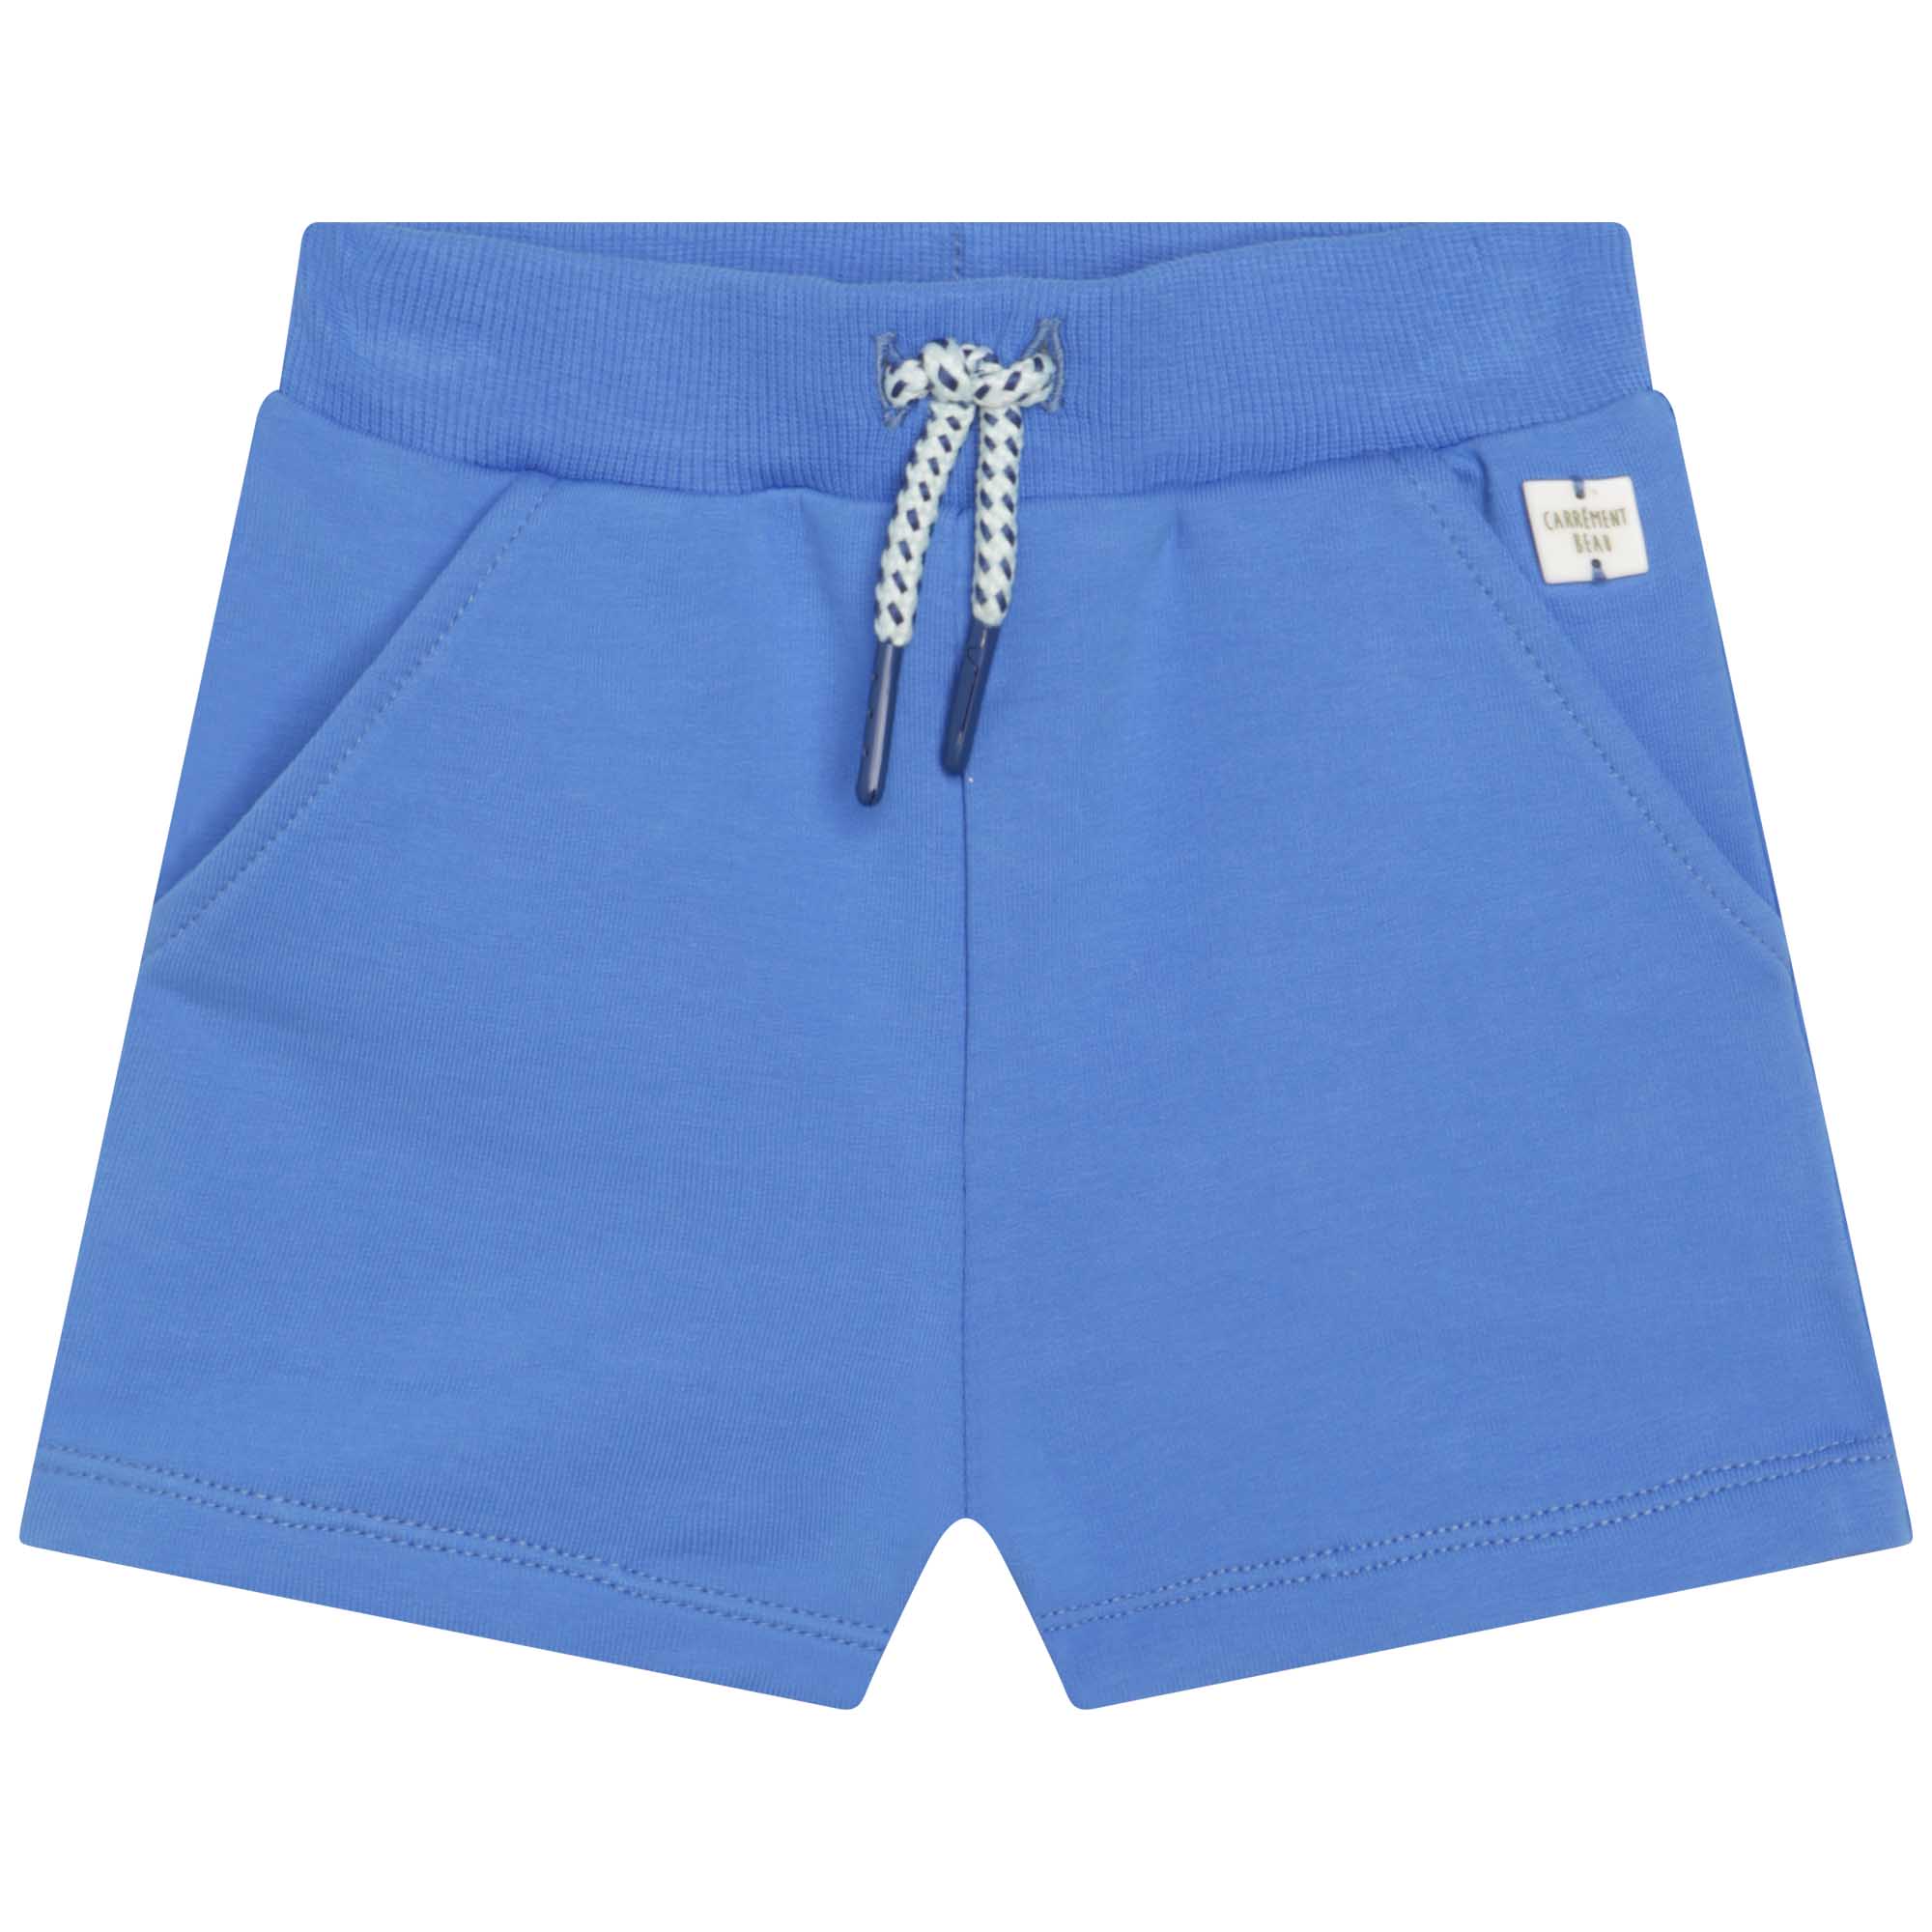 Plain shorts with pockets CARREMENT BEAU for BOY